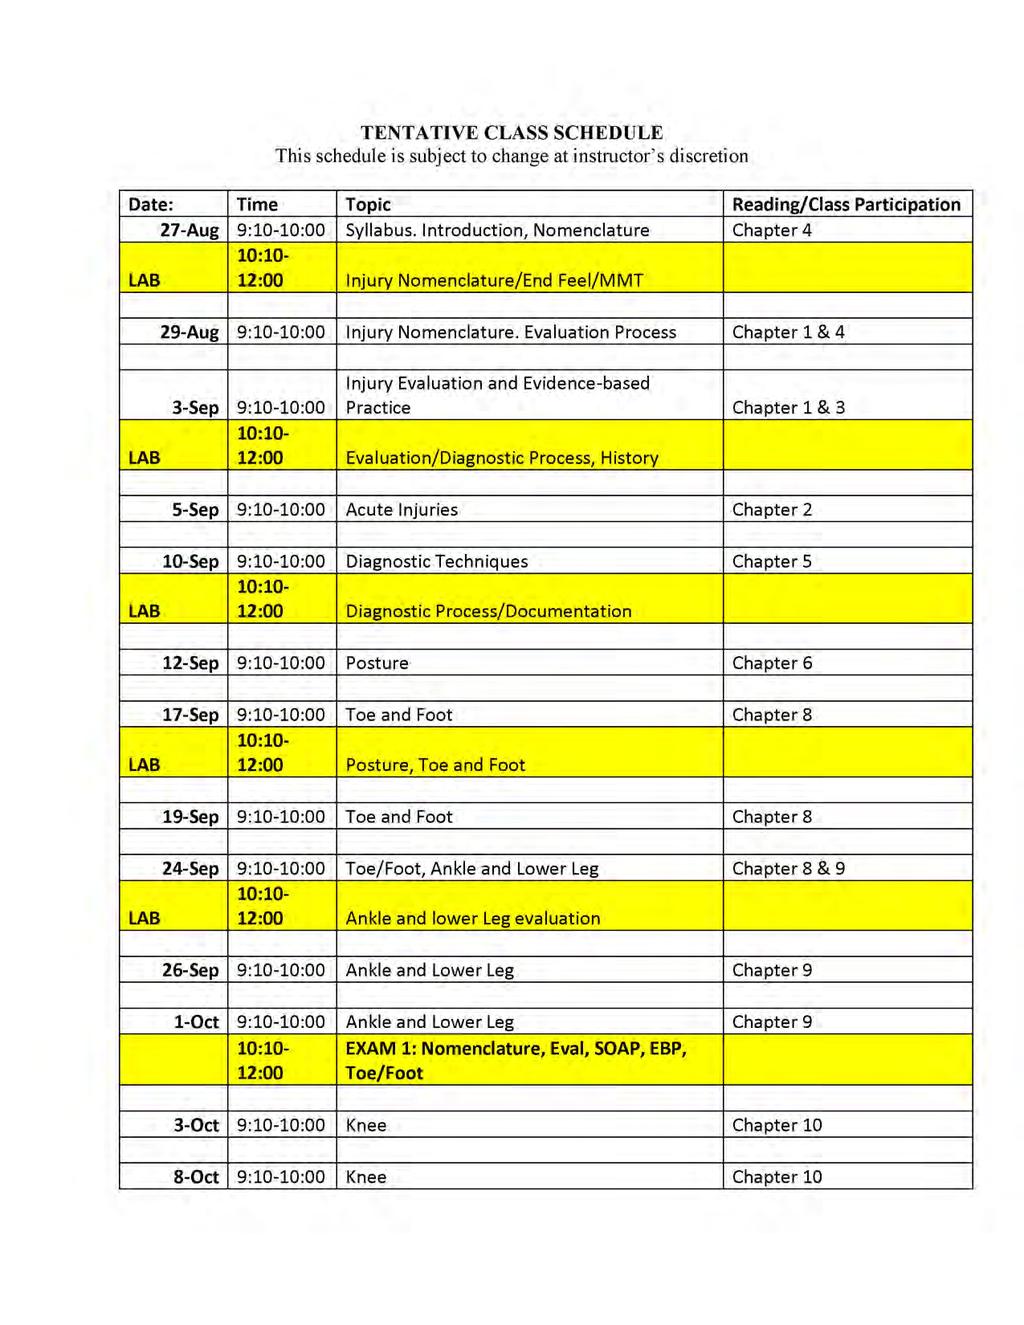 TENTATIVE CLASS SCHEDULE This schedule is subject to change at instructor s discretion Date: Time Topic Reading/Class Participation LAB 27-Aug 9:10-10:00 Syllabus.